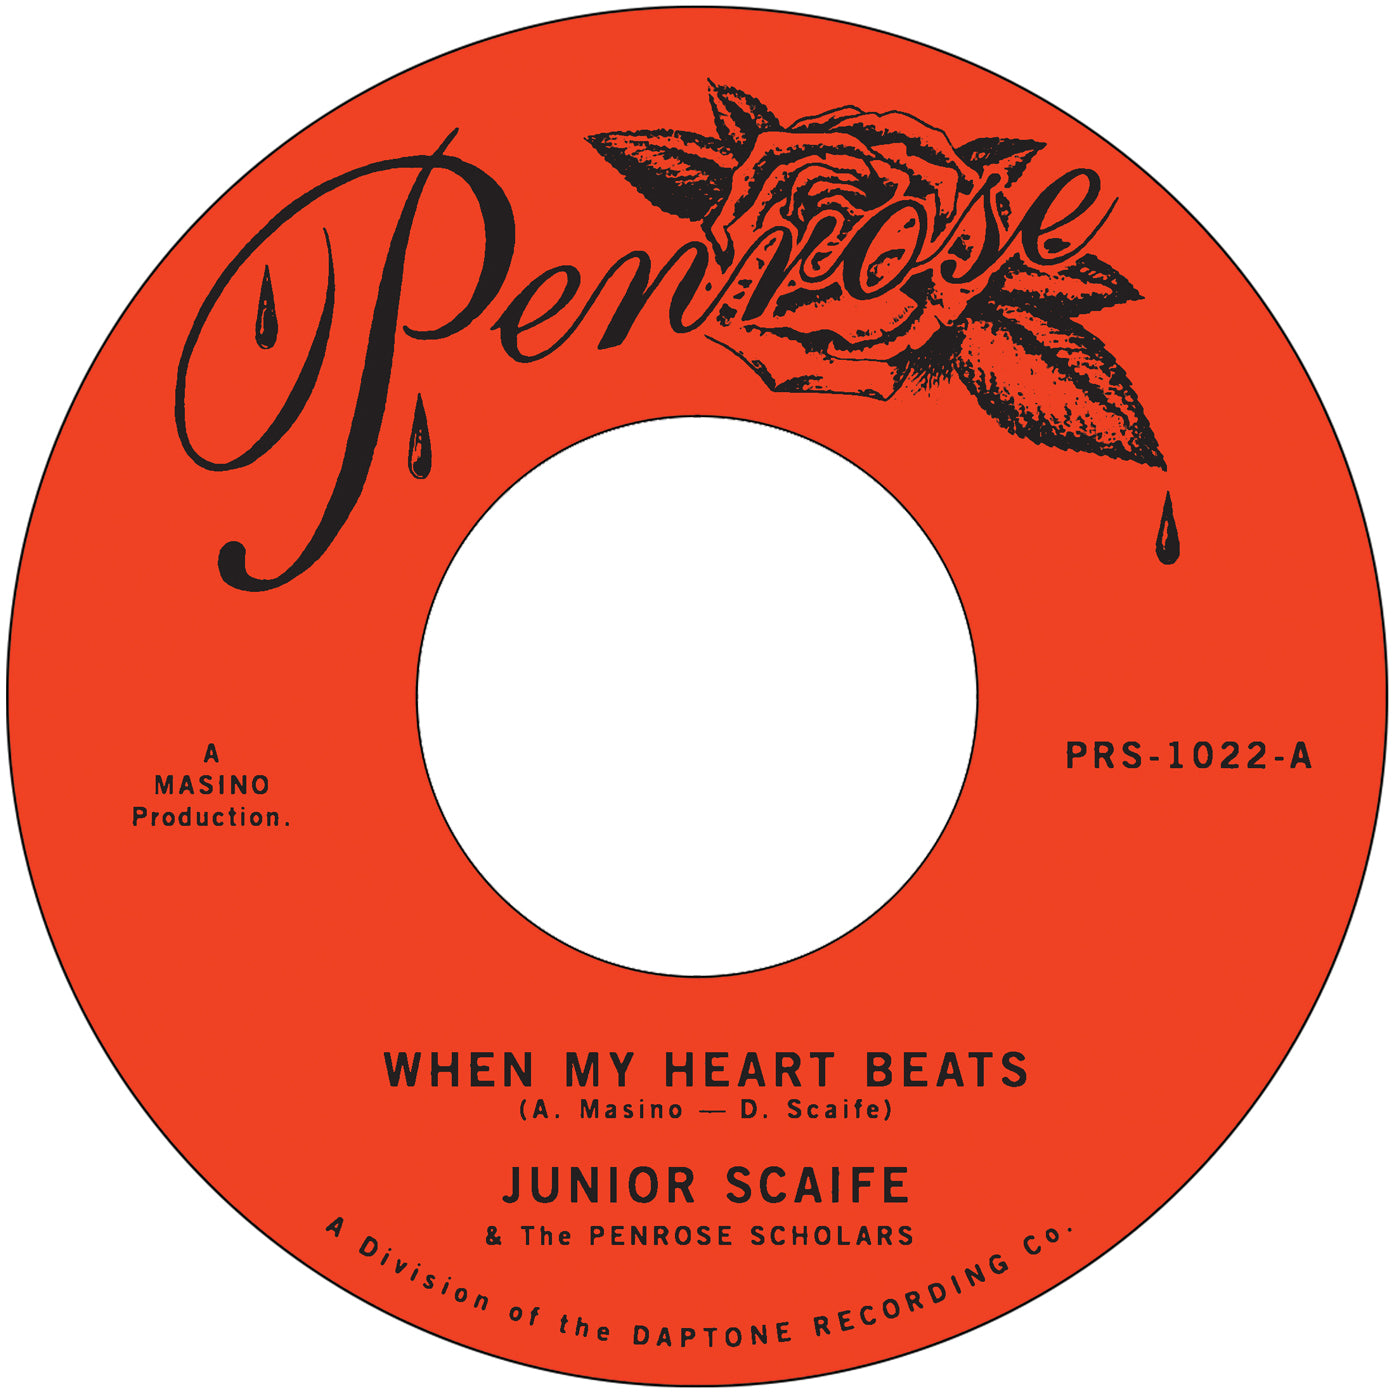 Junior Scaife "When My Heart Beats" / "Moment to Moment"